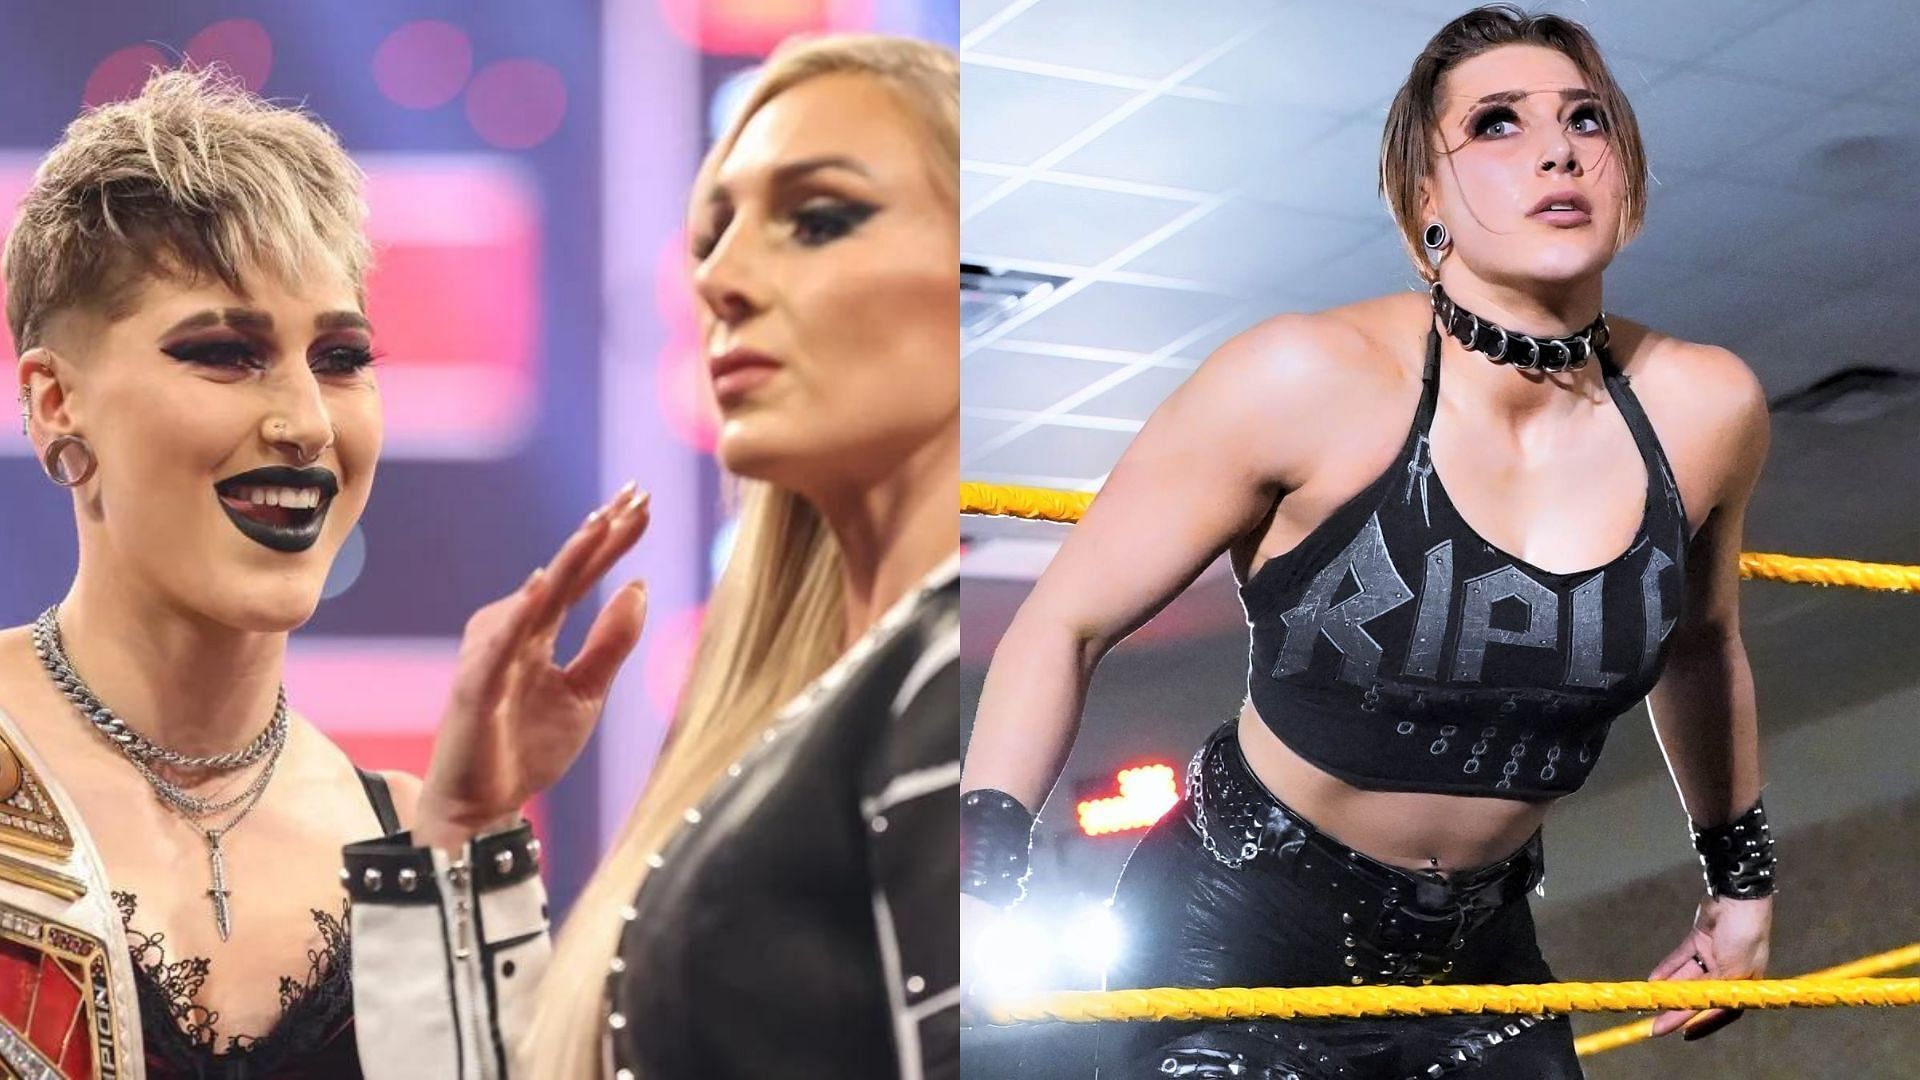 Charlotte Flair and Rhea Ripley will come face-to-face on this week